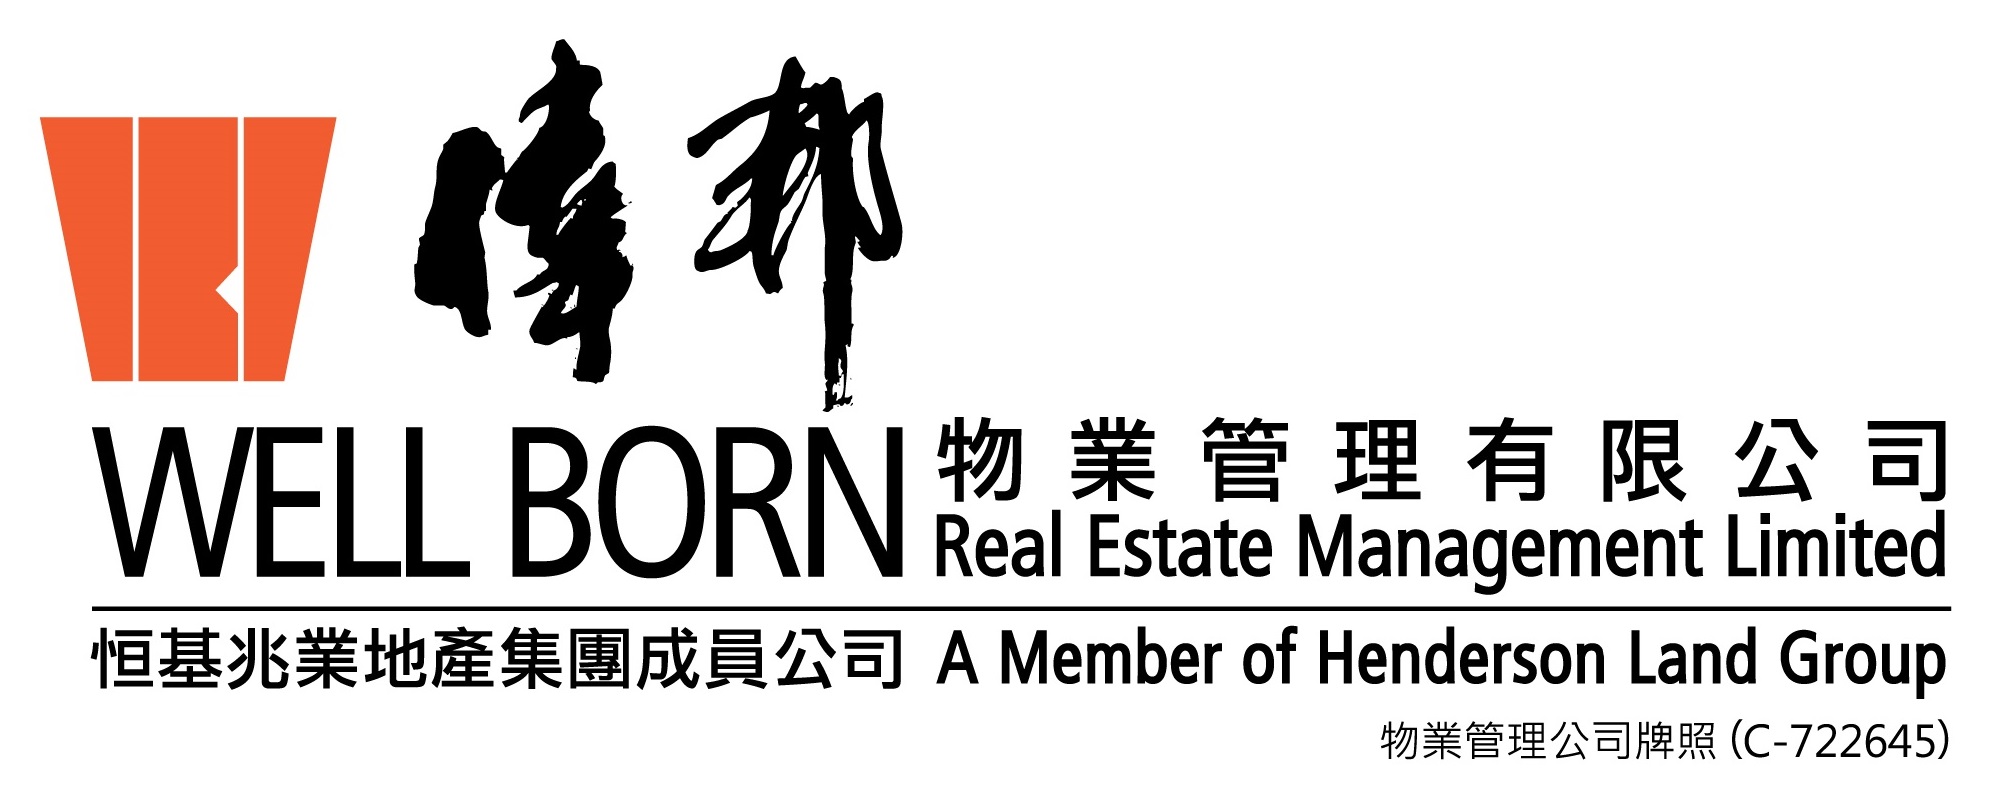 Well Born Real Estate Management Limited